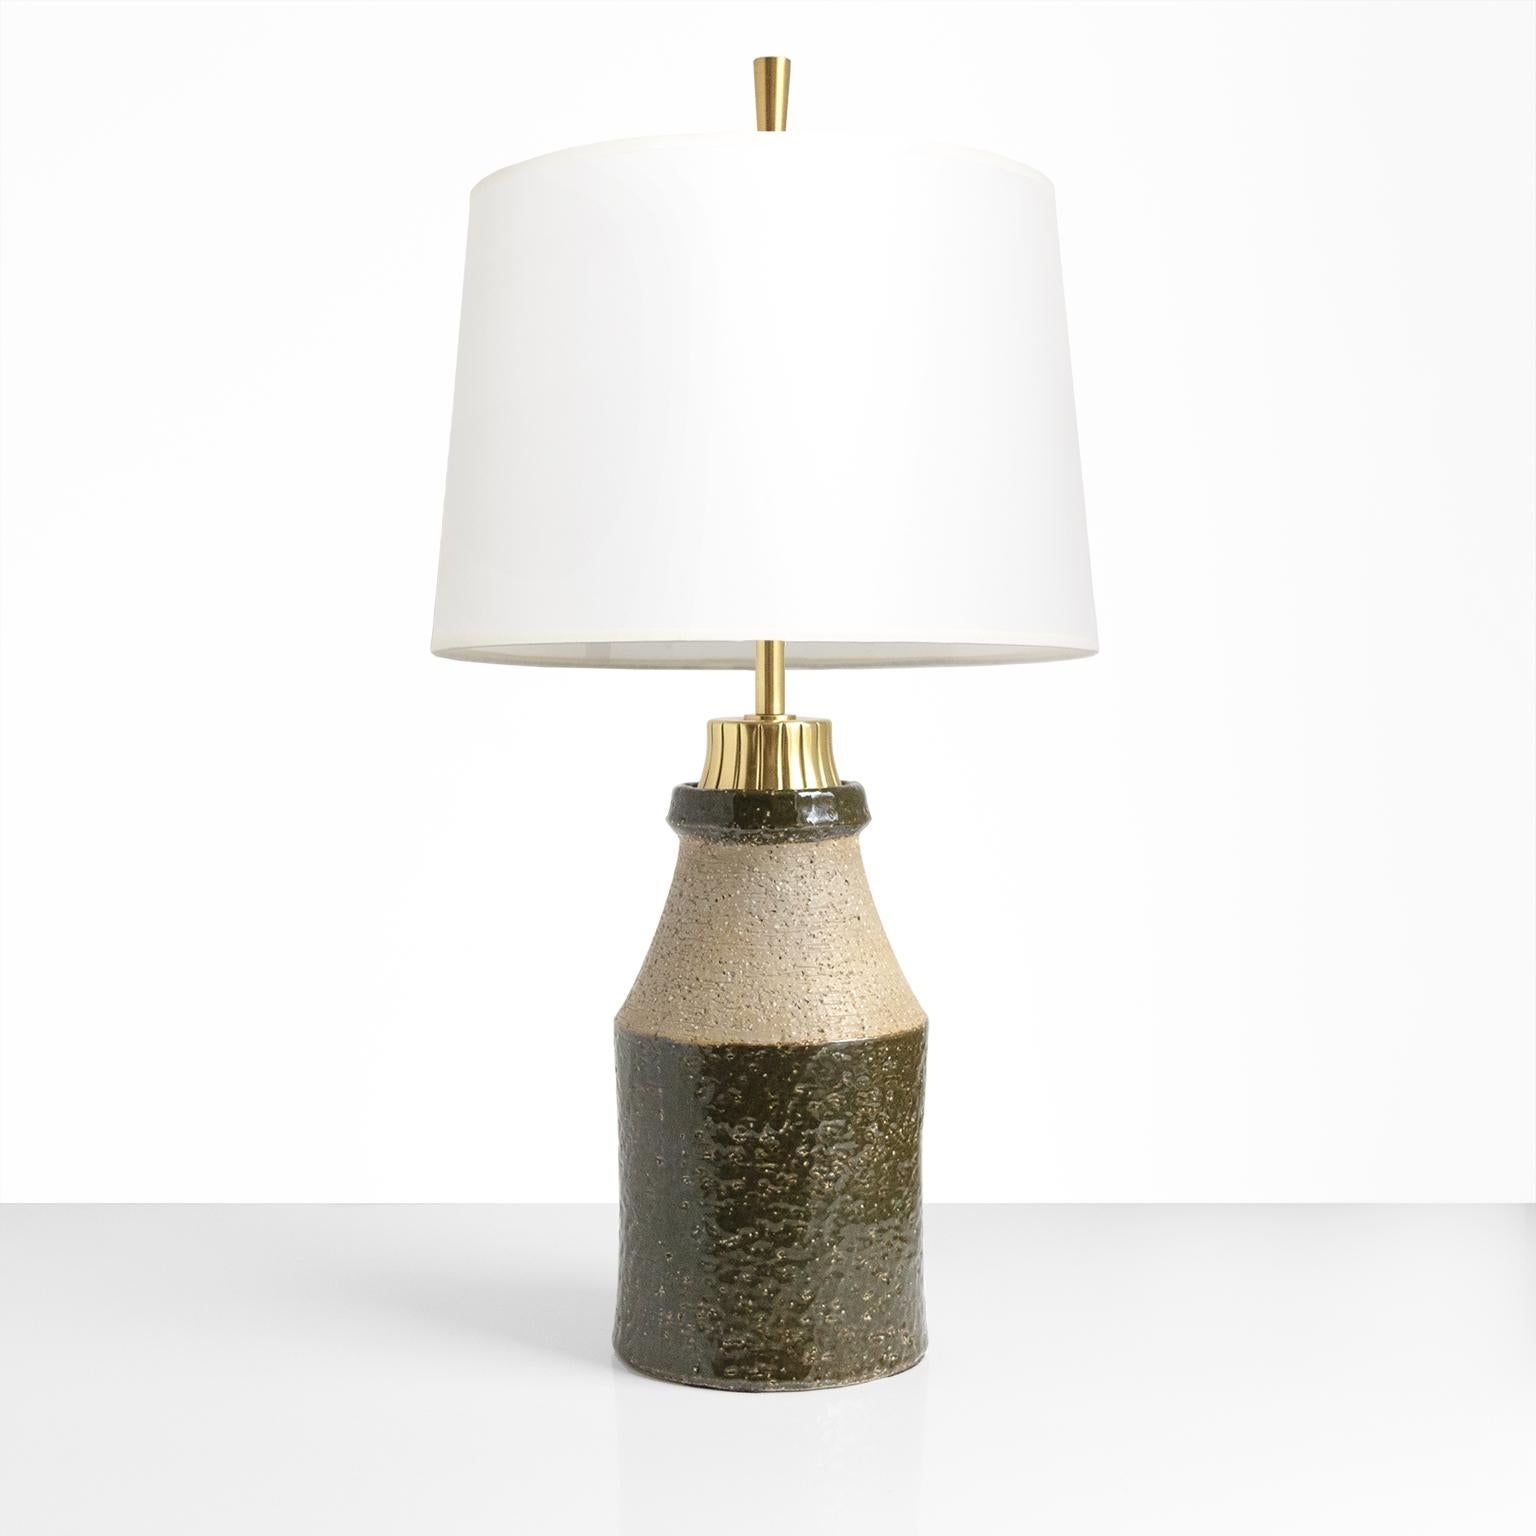 Hertha Bengston hand thrown, Scandinavian Modern ceramic lamp with brass hardware and stem with double cluster sockets.  Made at Rorstrand Studio, Sweden, signed and dated on bottom. Newley electrified for use in USA. 

Total height 24.5” Base